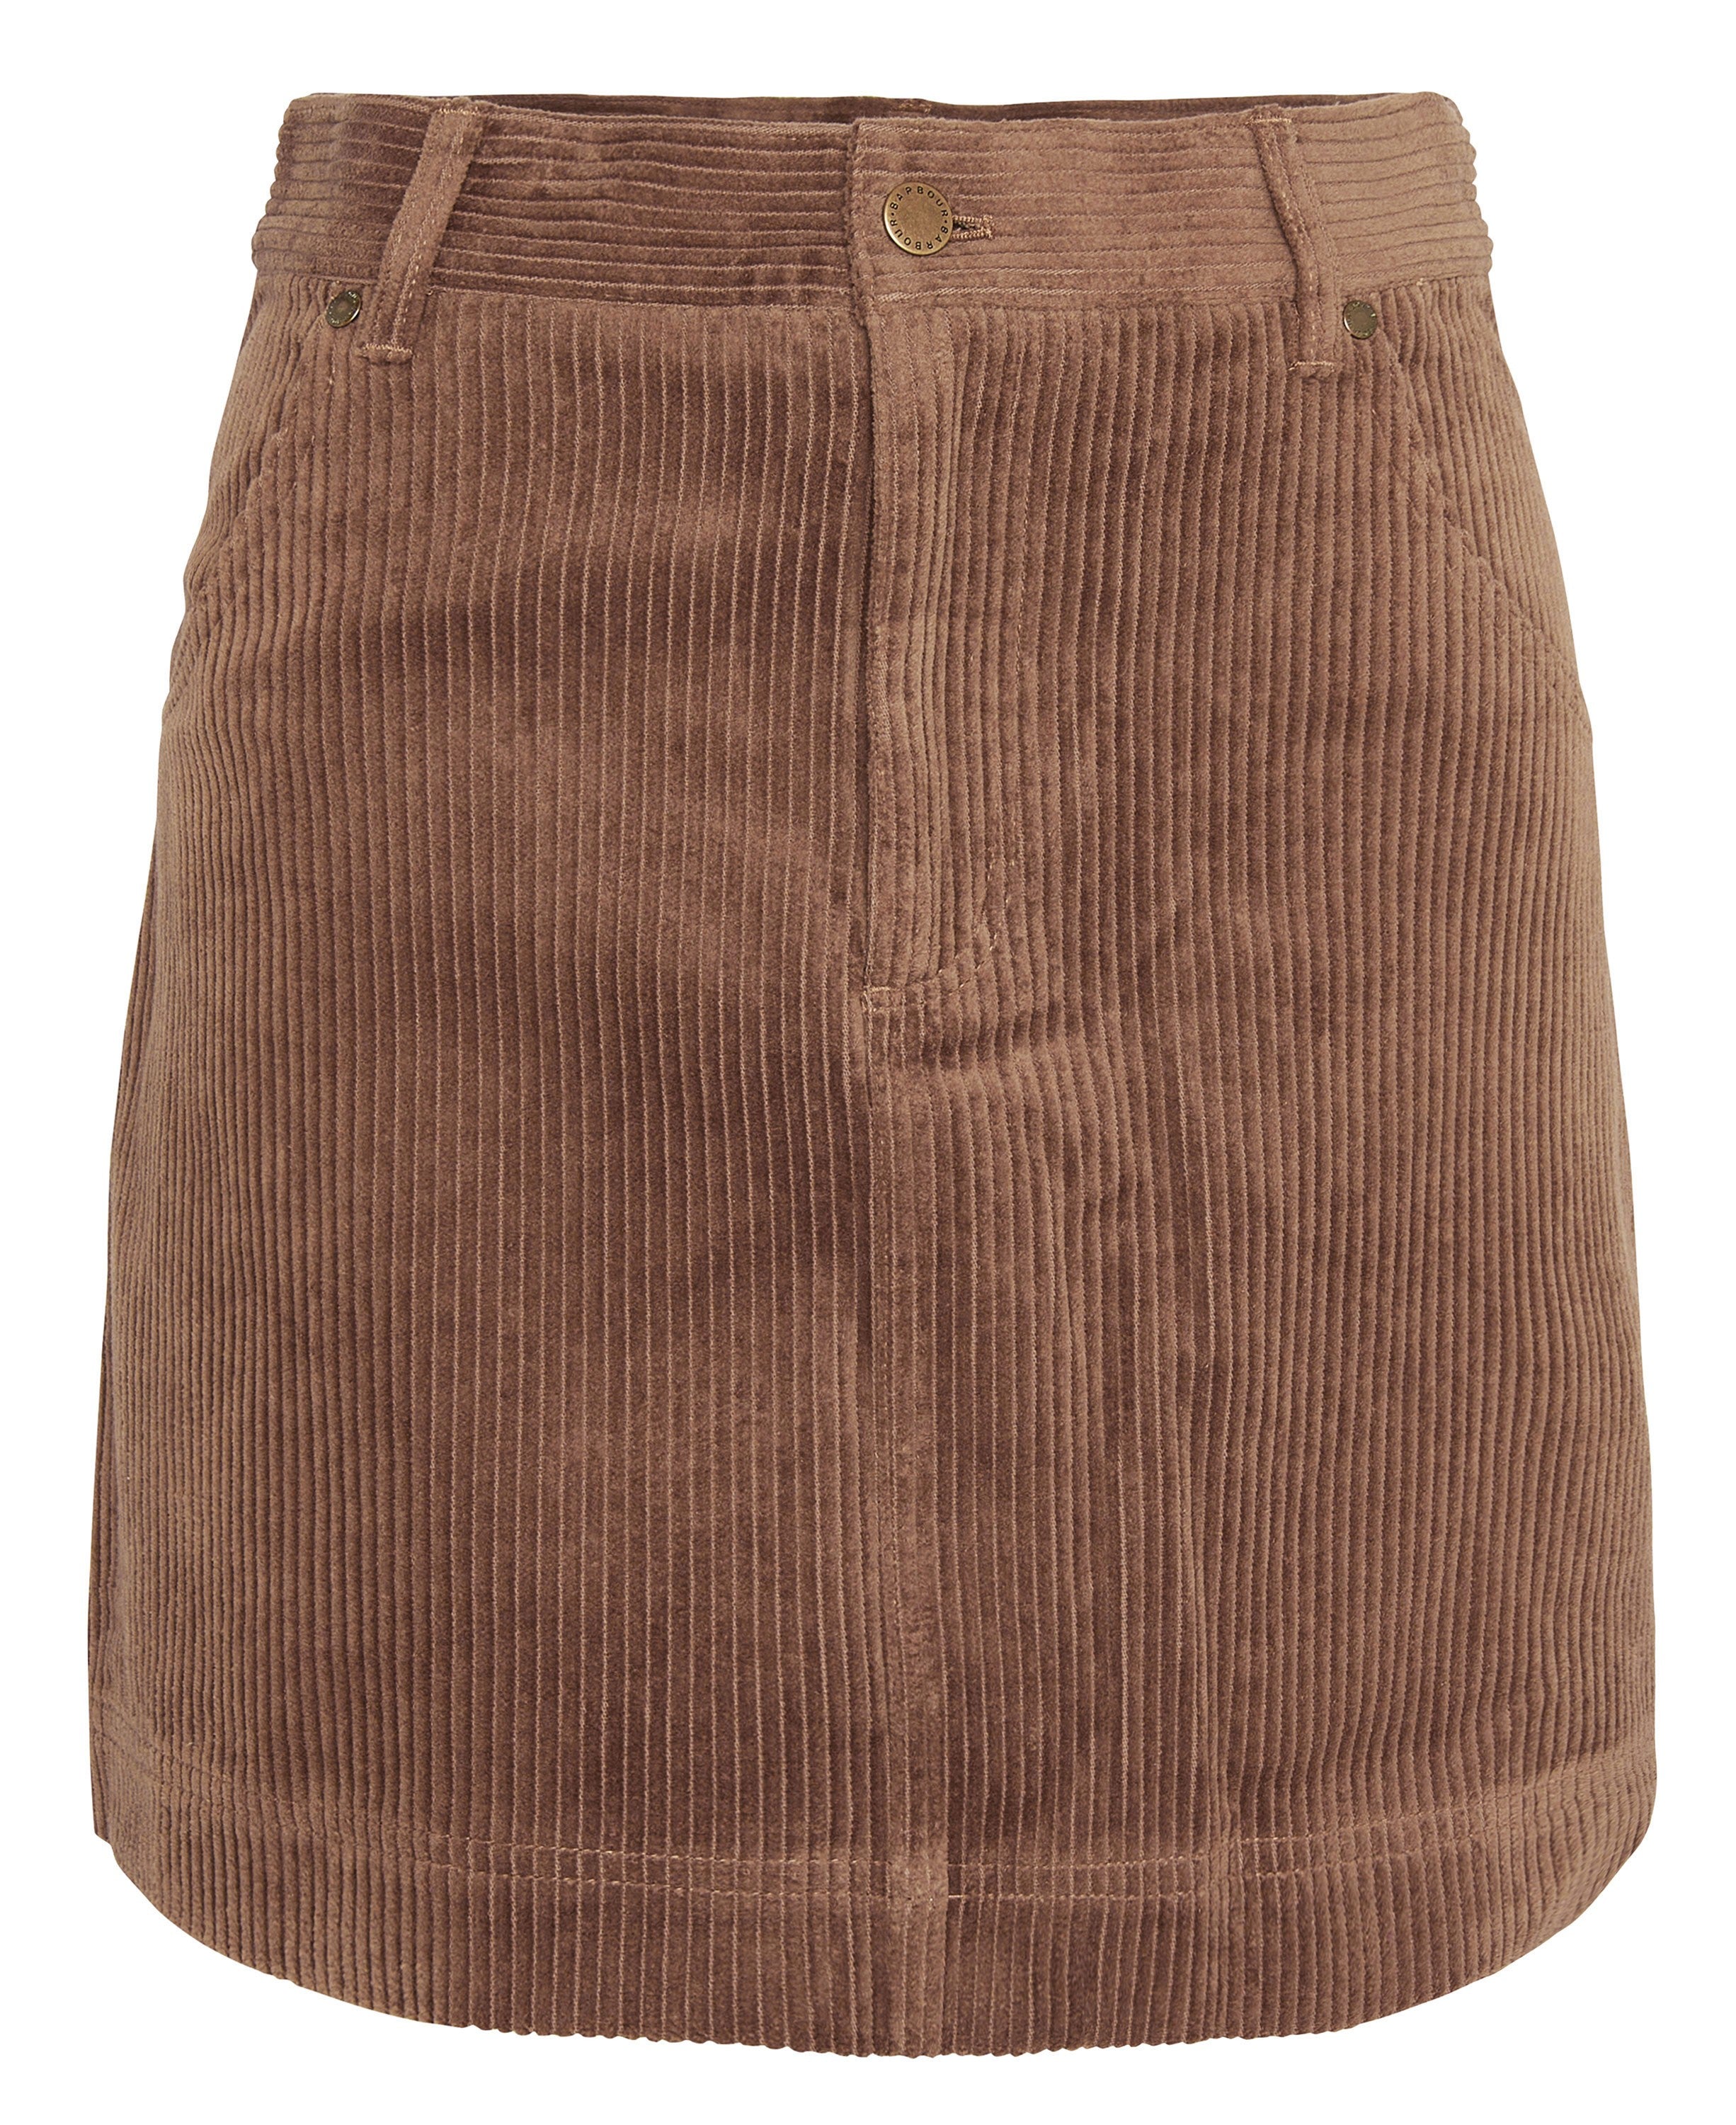 Oakfield Cord Skirt - Taupe